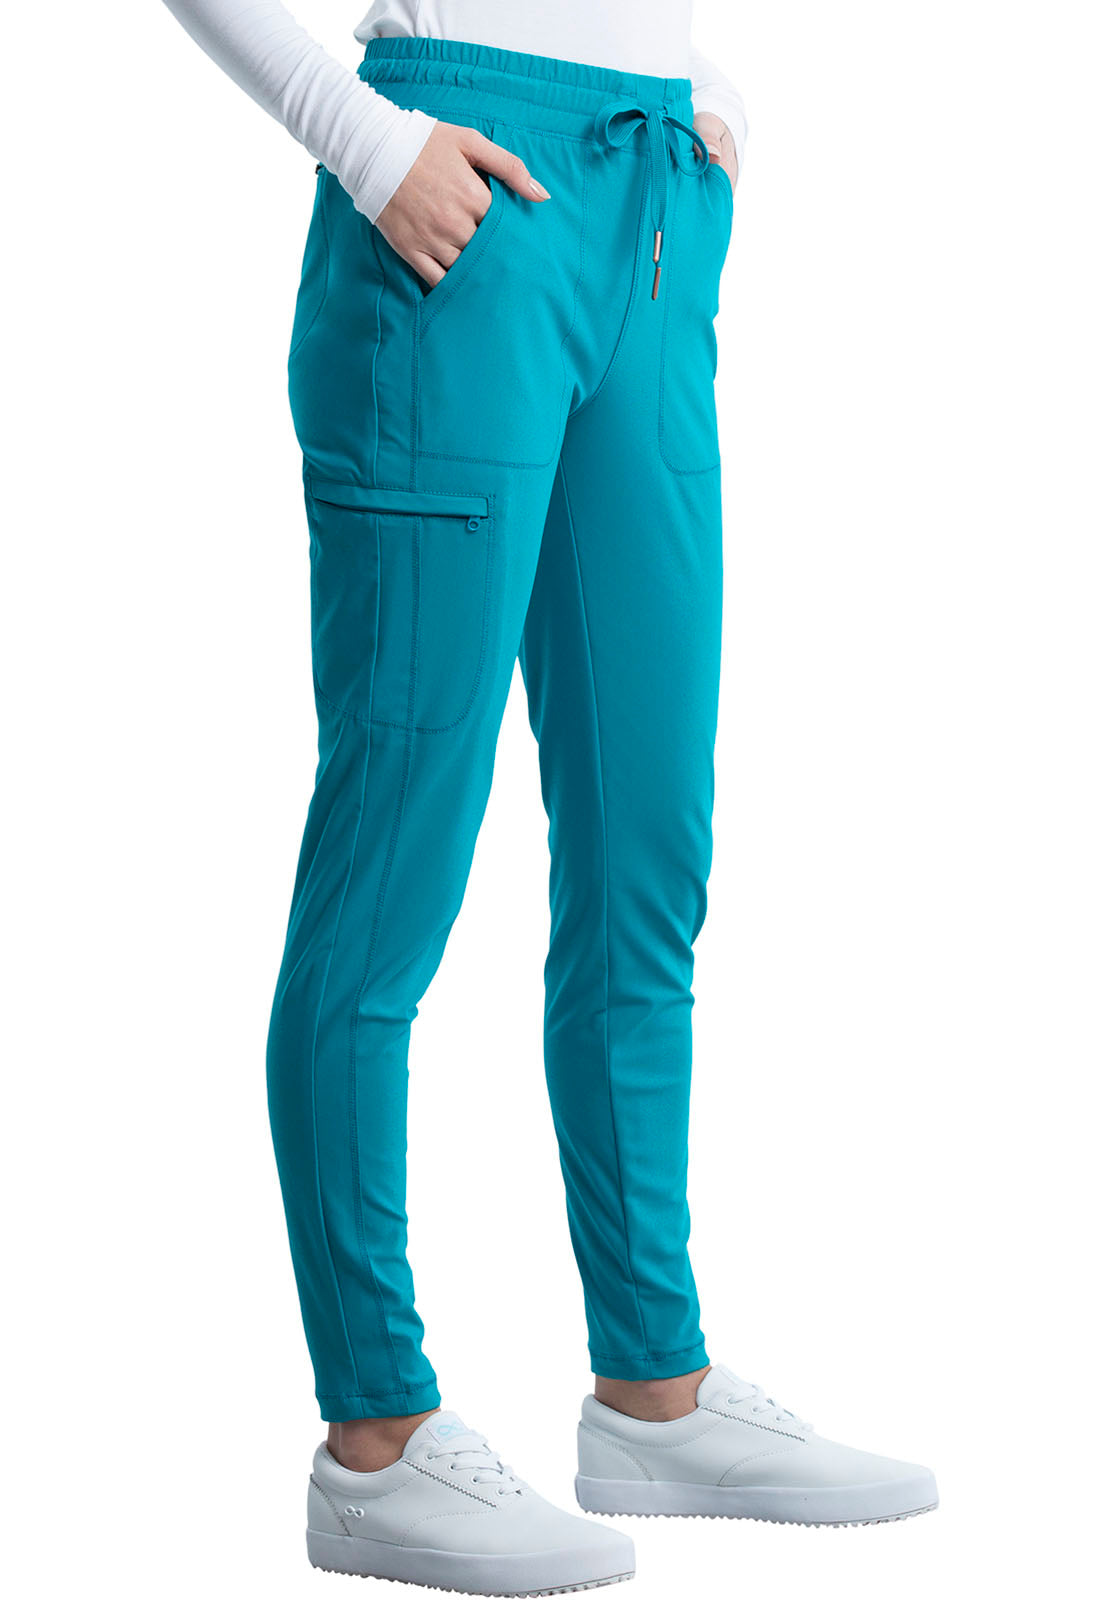 OFE Conj. Qx. Cherokee Form Mujer CK840/CK095 Teal